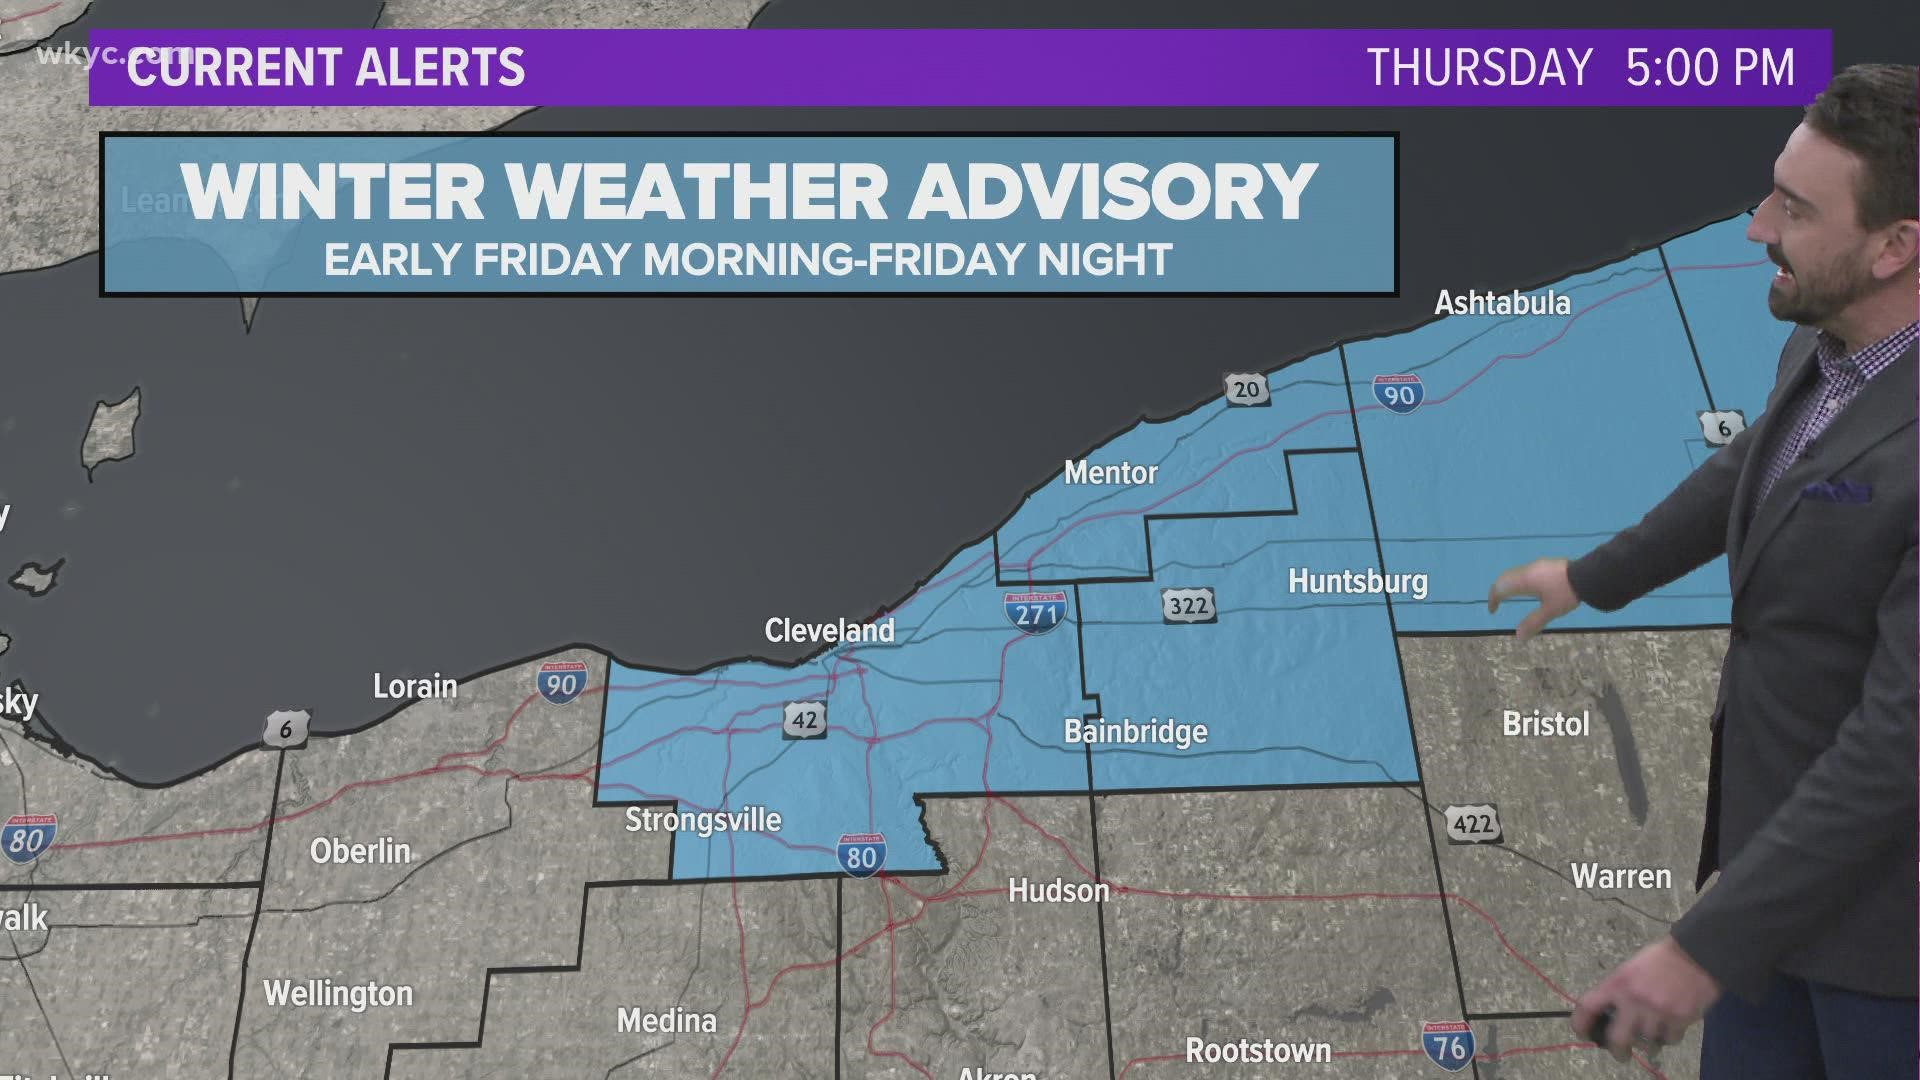 The National Weather Service has issued a Winter Weather Advisory for several Northeast Ohio counties in the "Snowbelt" area for Friday.